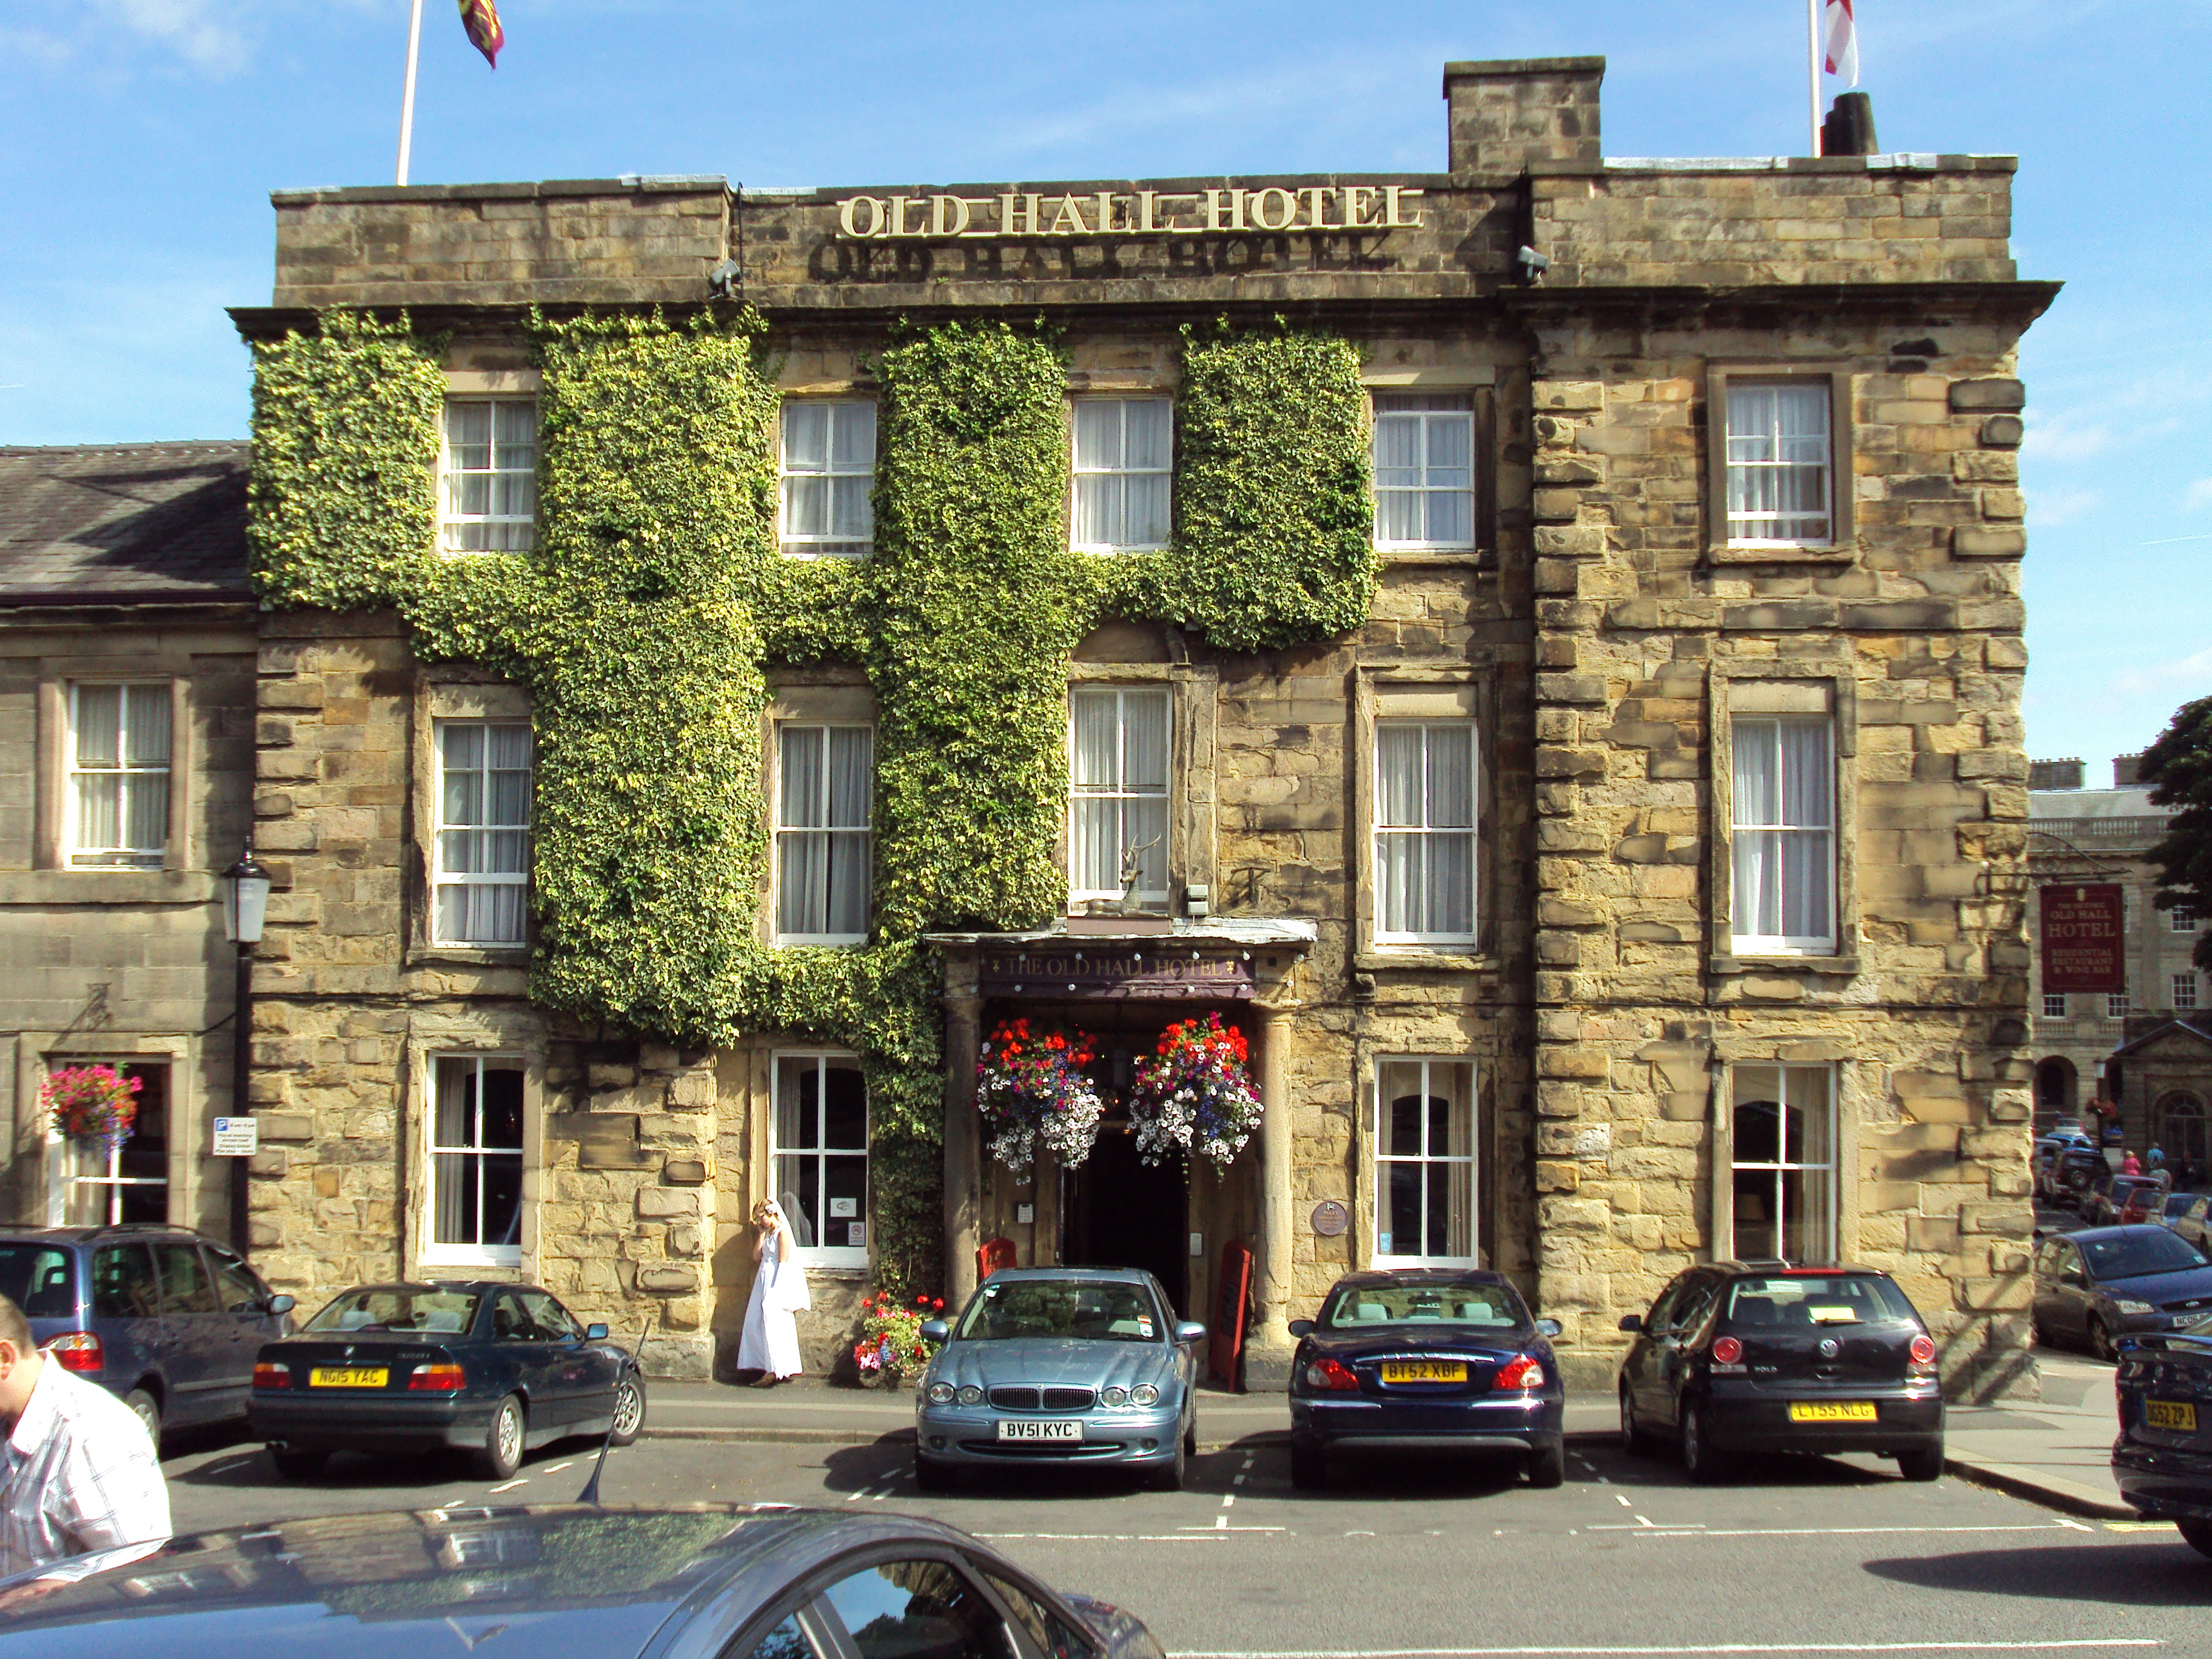 More information about The Anchor Inn Tideswell